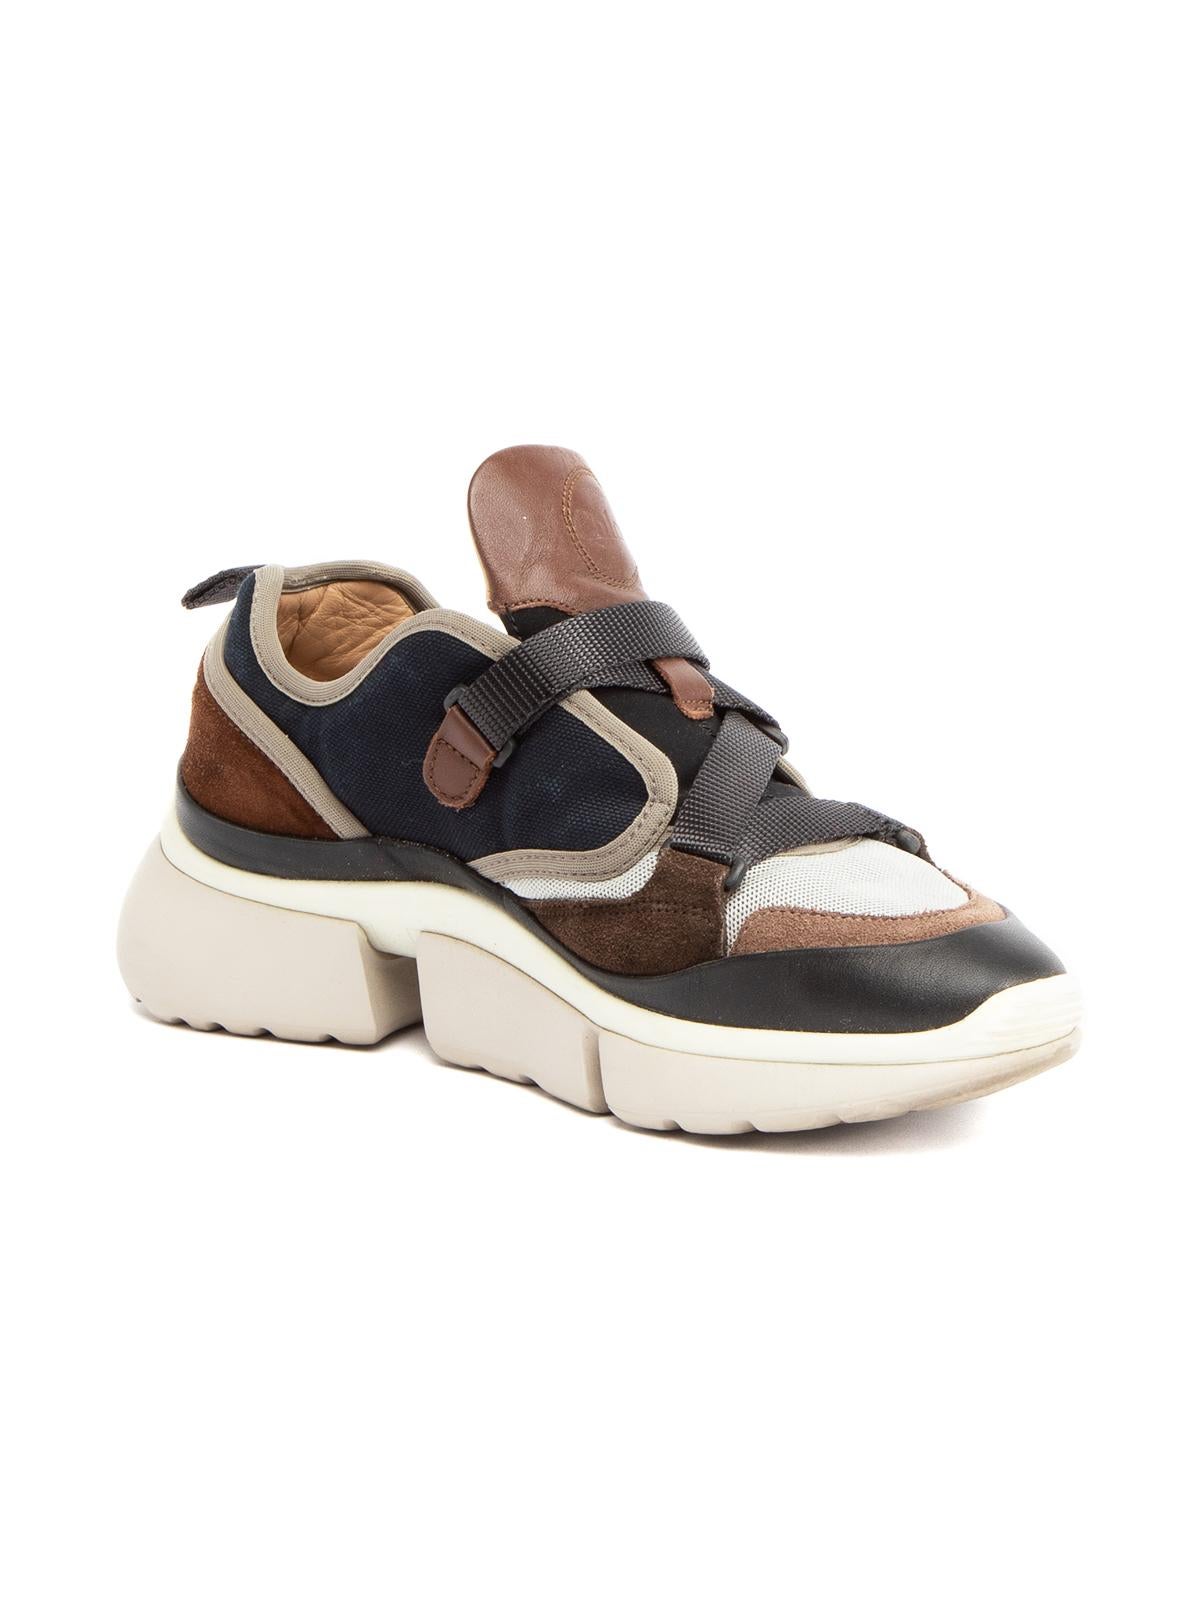 CONDITION is Very good. Minimal wear to sneakers is evident. Minimal wear to midsole and toe of right sneaker on this used Chloe designer resale item. Details Multicolor Chunky sneaker Multi fabric Strap fastening Almond toe Made in Italy